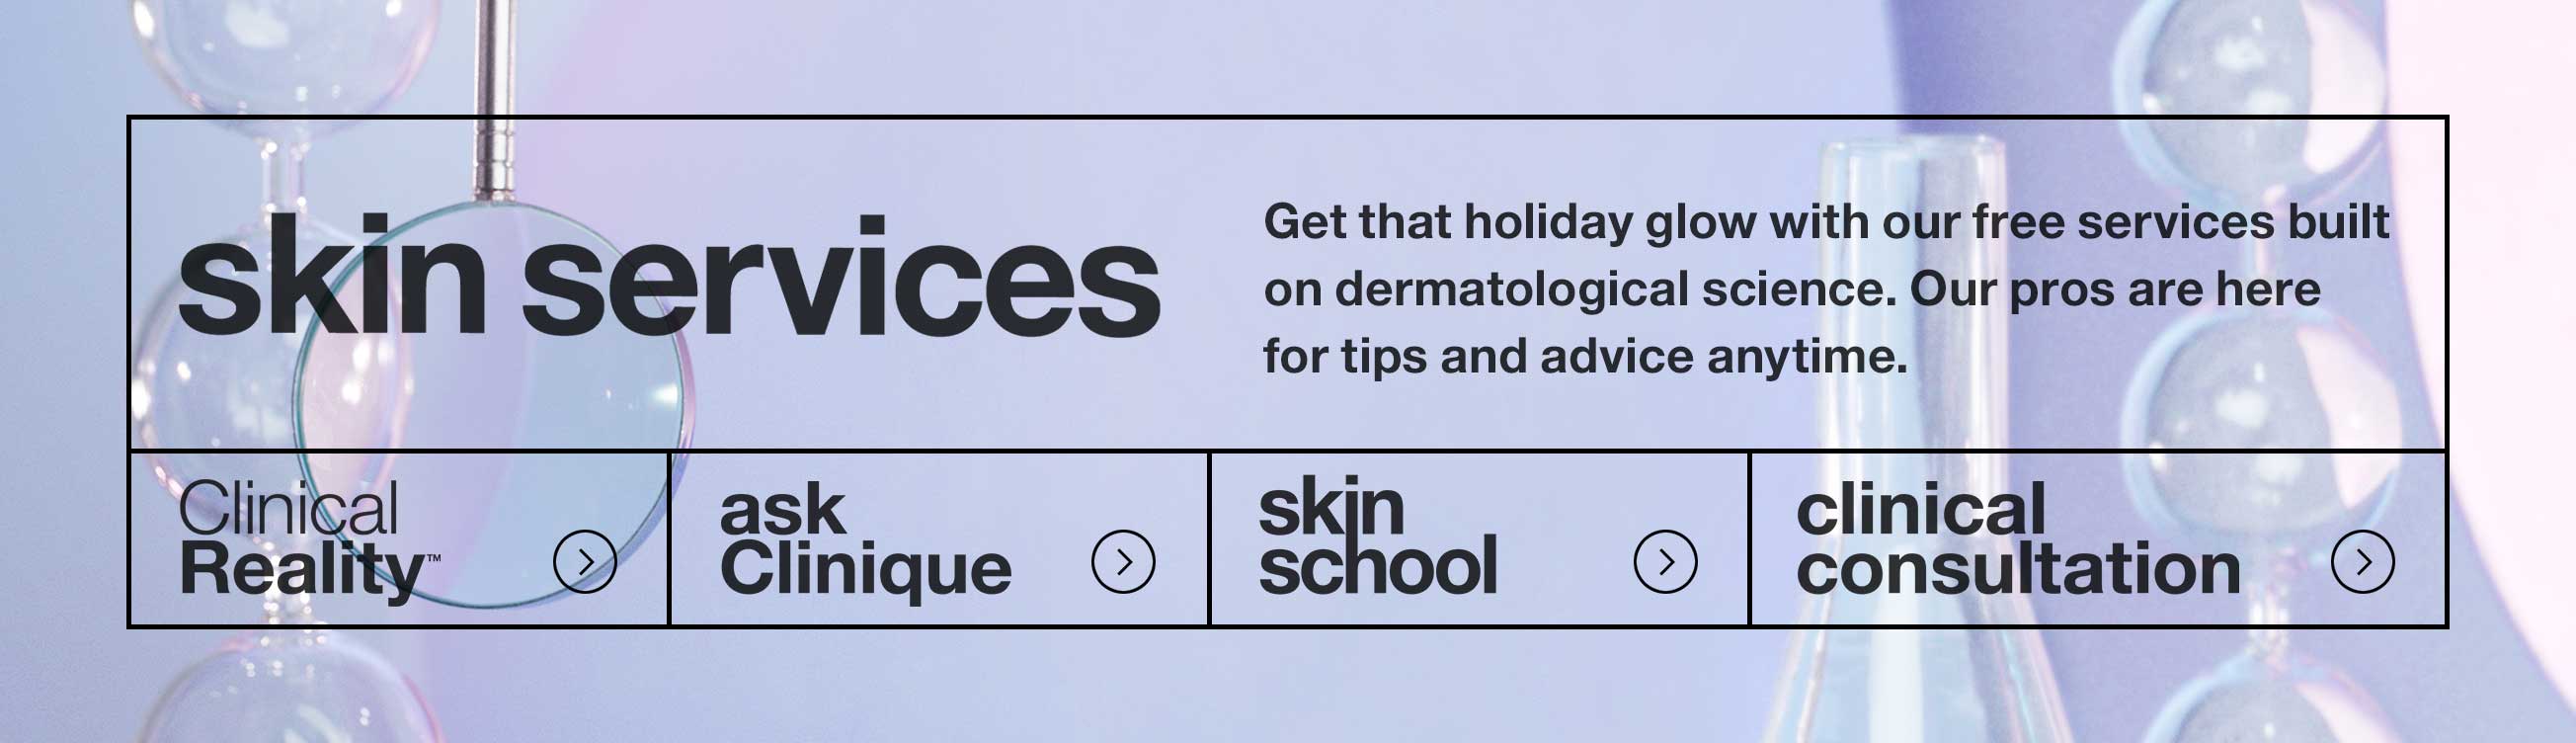 Skin Services. Get that holiday glow with our free services built on dermatological science.